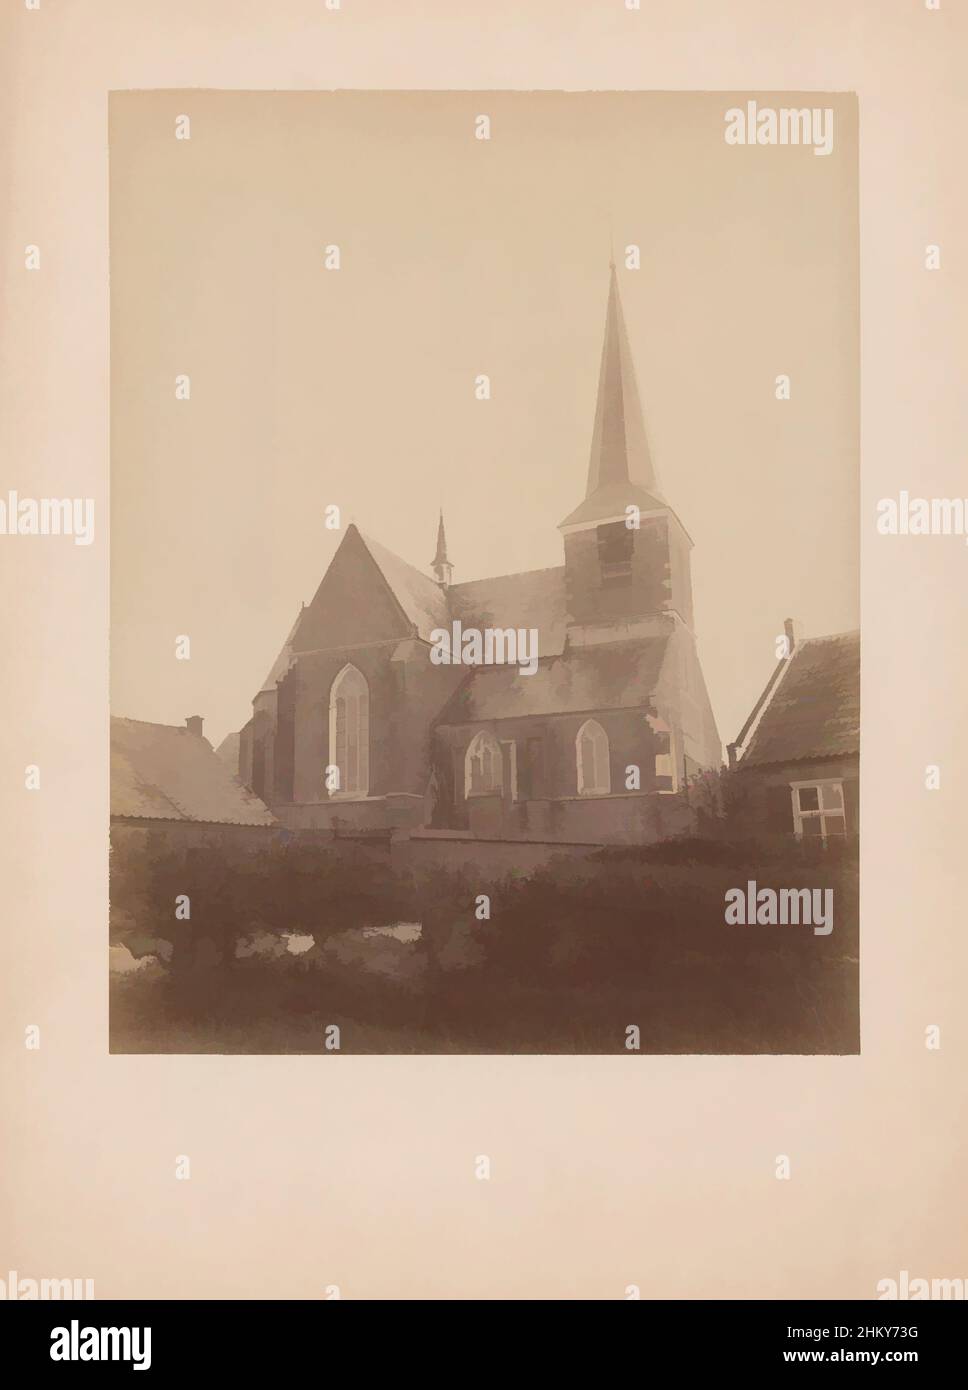 Art inspired by View of the Roman Catholic Church in Arcen, anoniem (Monumentenzorg) (attributed to), Arcen, 1892, photographic support, cardboard, albumen print, height 226 mm × width 176 mm, Classic works modernized by Artotop with a splash of modernity. Shapes, color and value, eye-catching visual impact on art. Emotions through freedom of artworks in a contemporary way. A timeless message pursuing a wildly creative new direction. Artists turning to the digital medium and creating the Artotop NFT Stock Photo